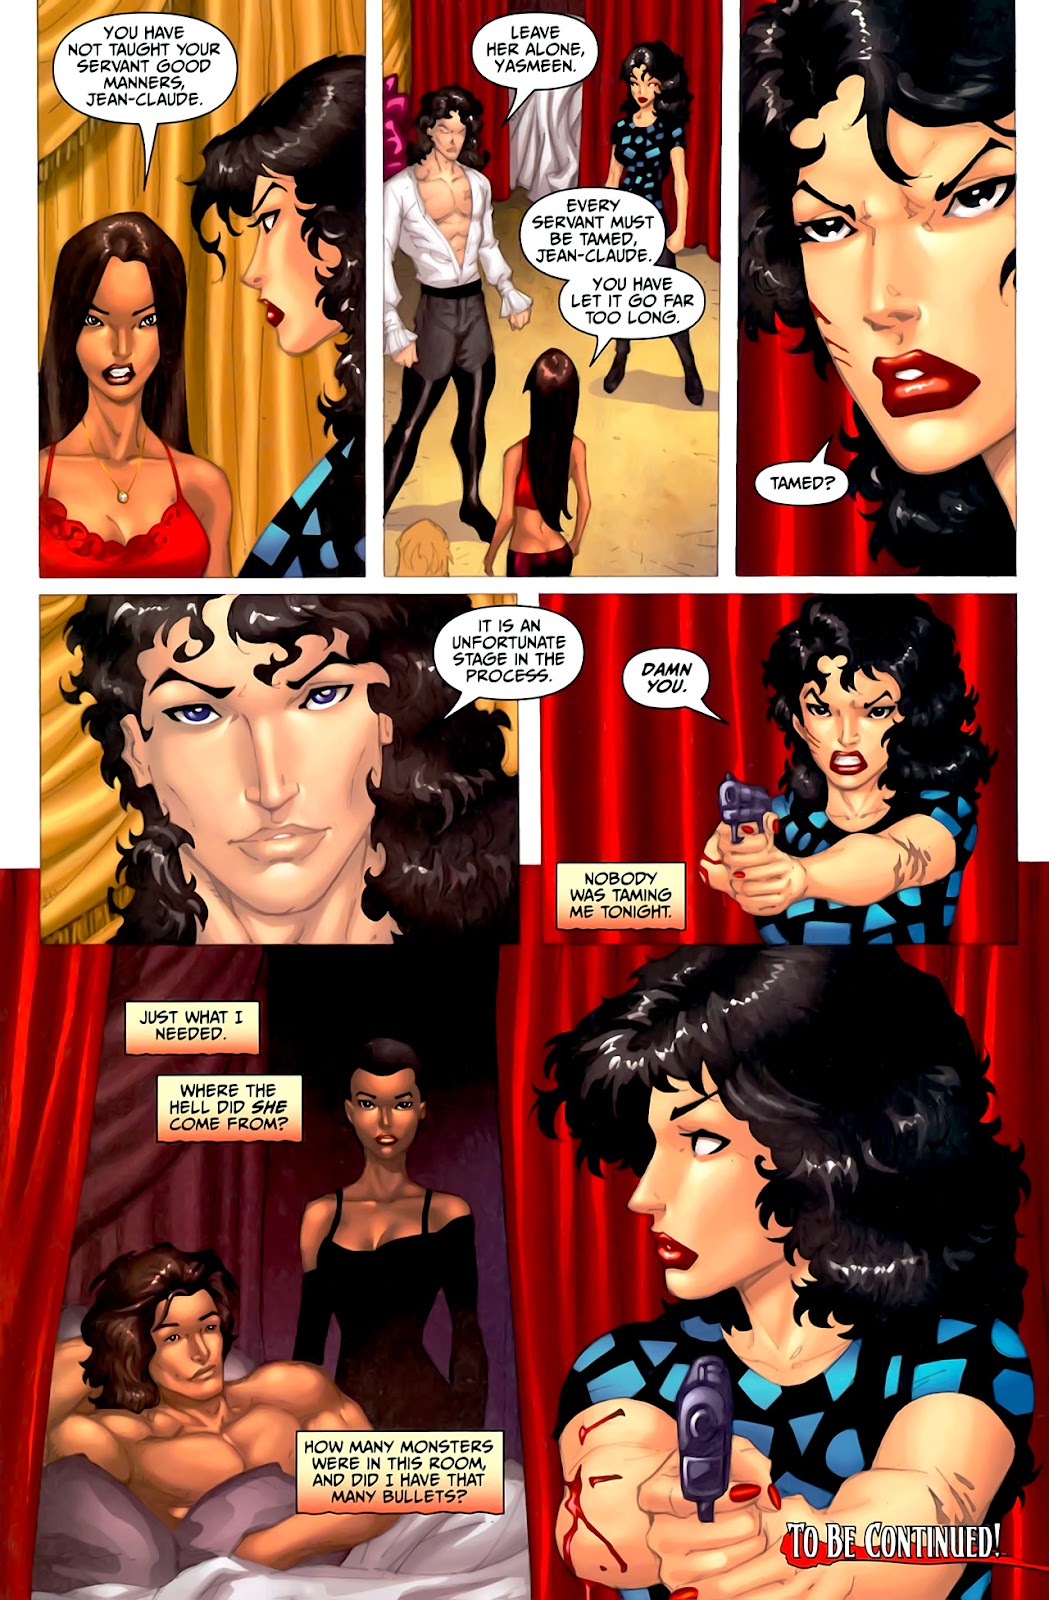 Anita Blake, Vampire Hunter: Circus of the Damned - The Charmer issue 2 - Page 33